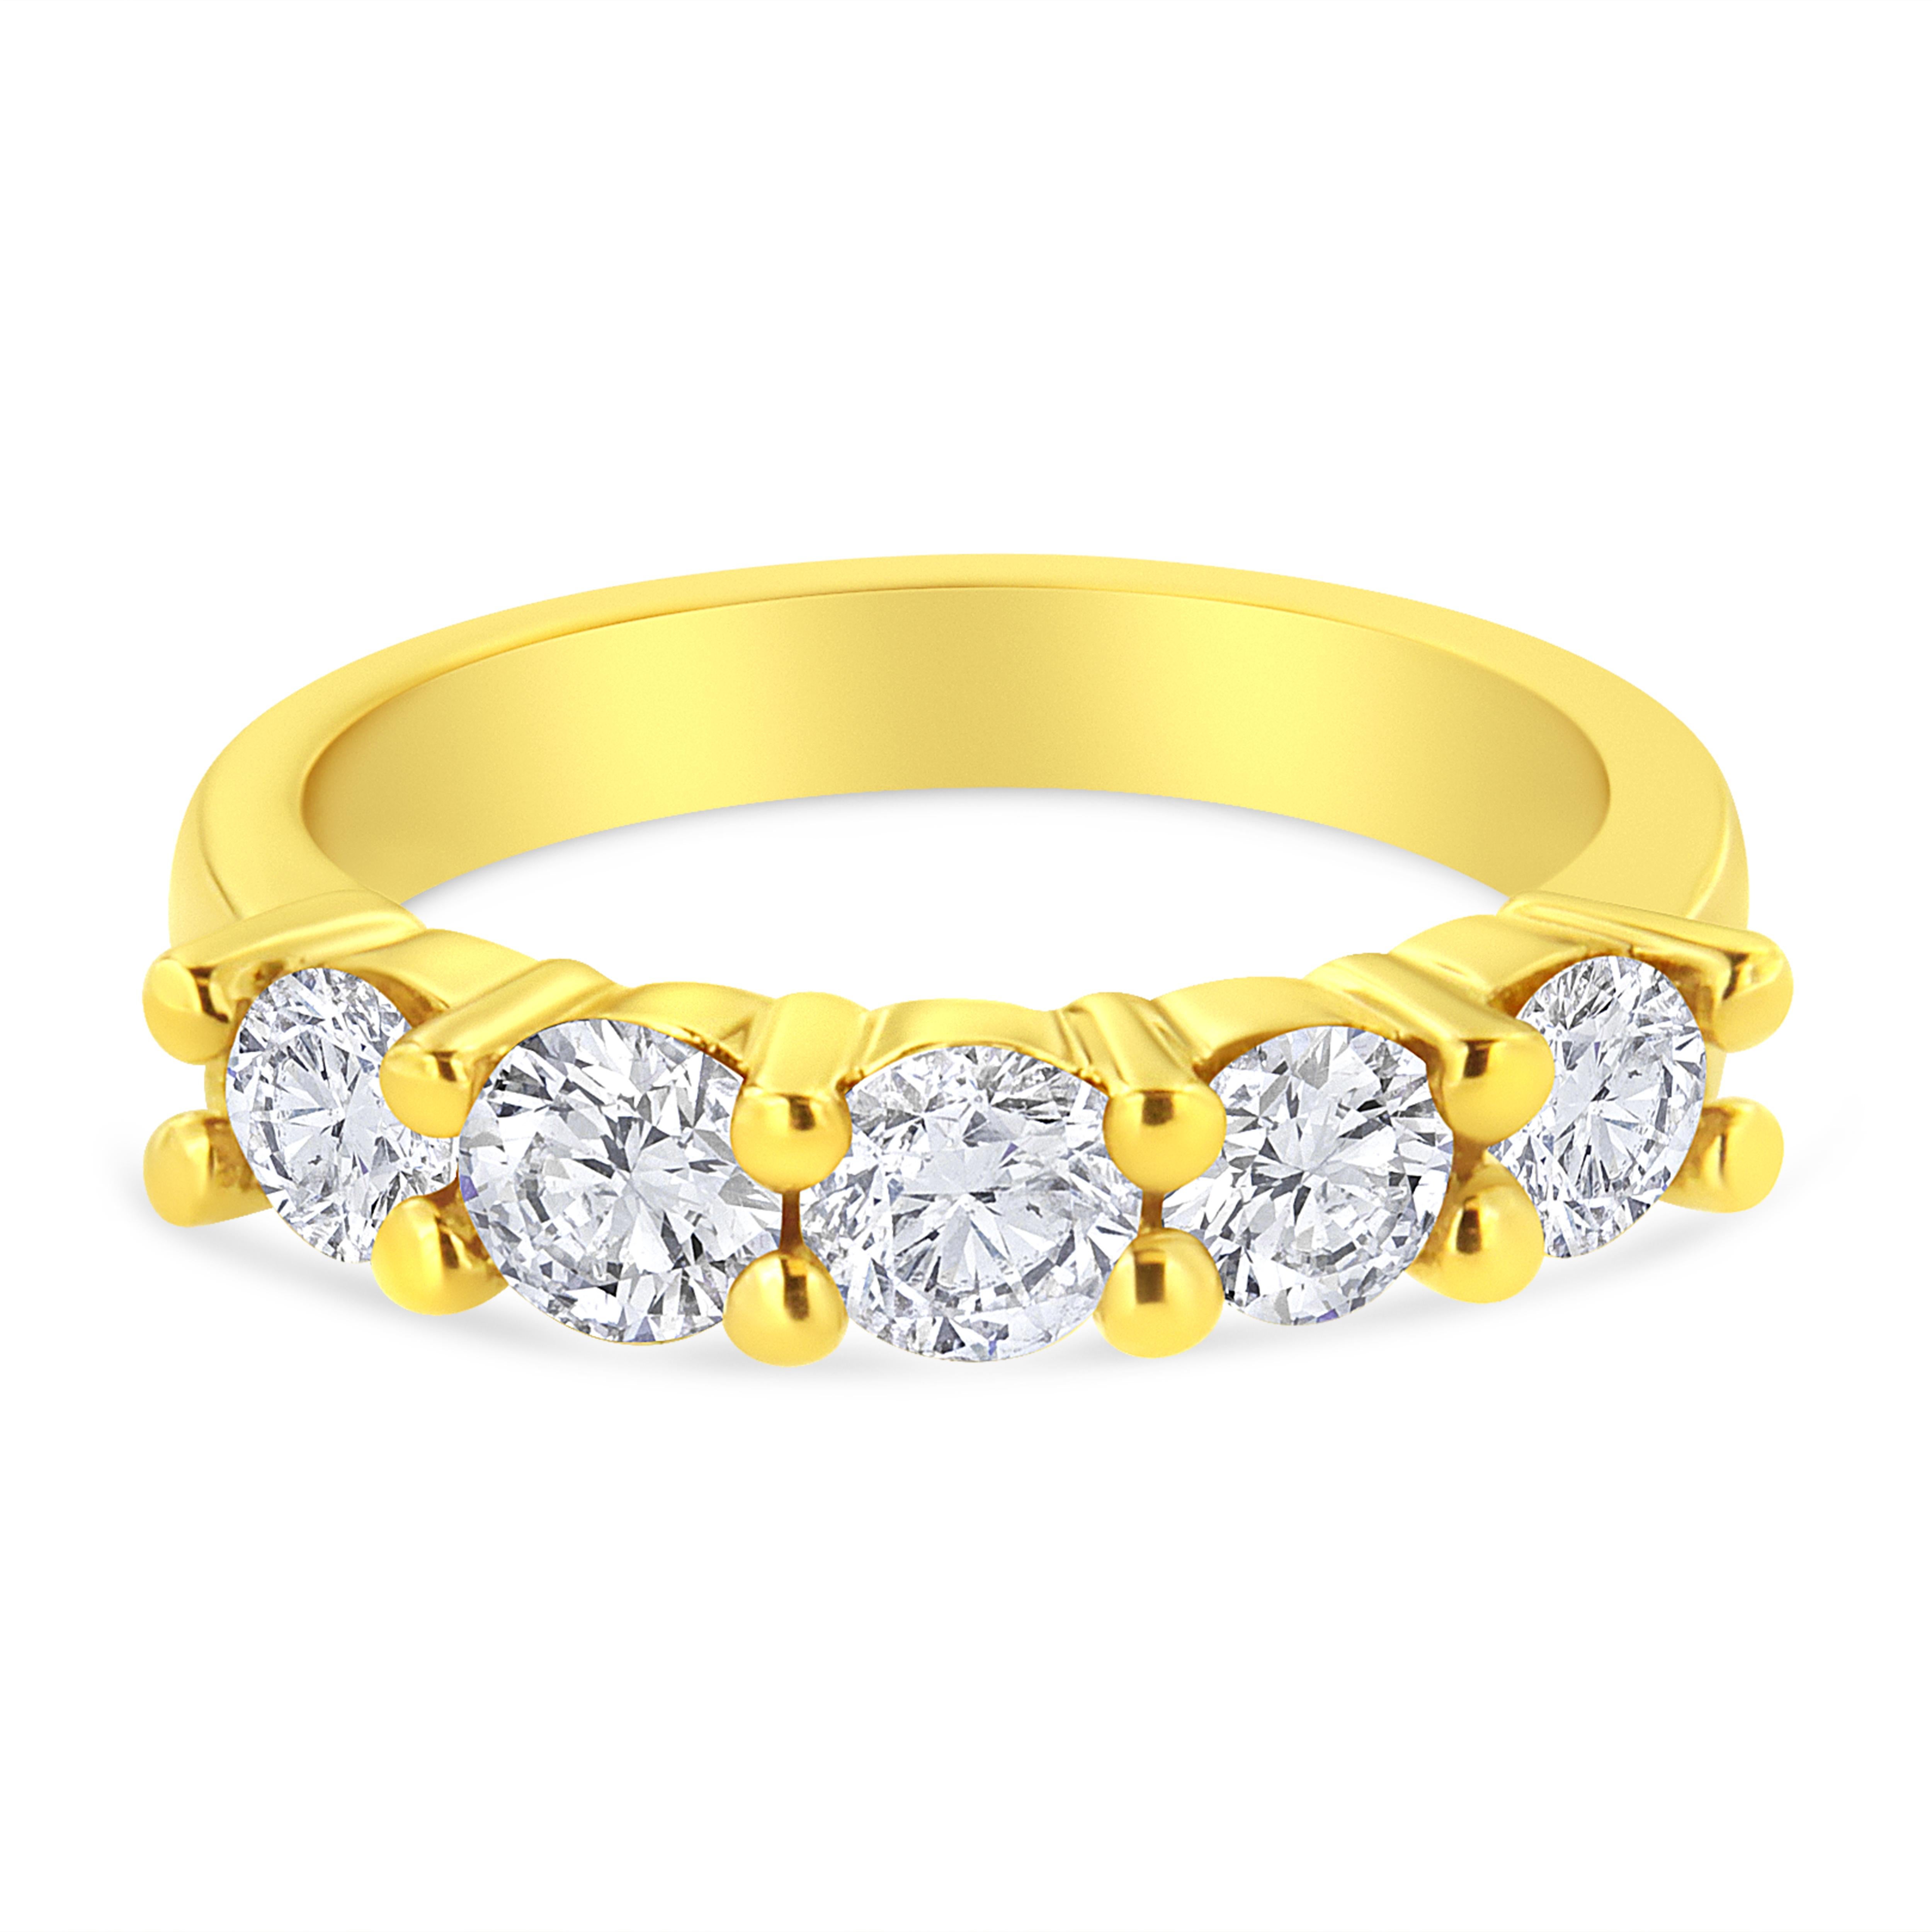 For Sale:  Yellow Gold Over Silver 1 1/2 Carat Diamond Anniversary or Wedding Band Ring 2